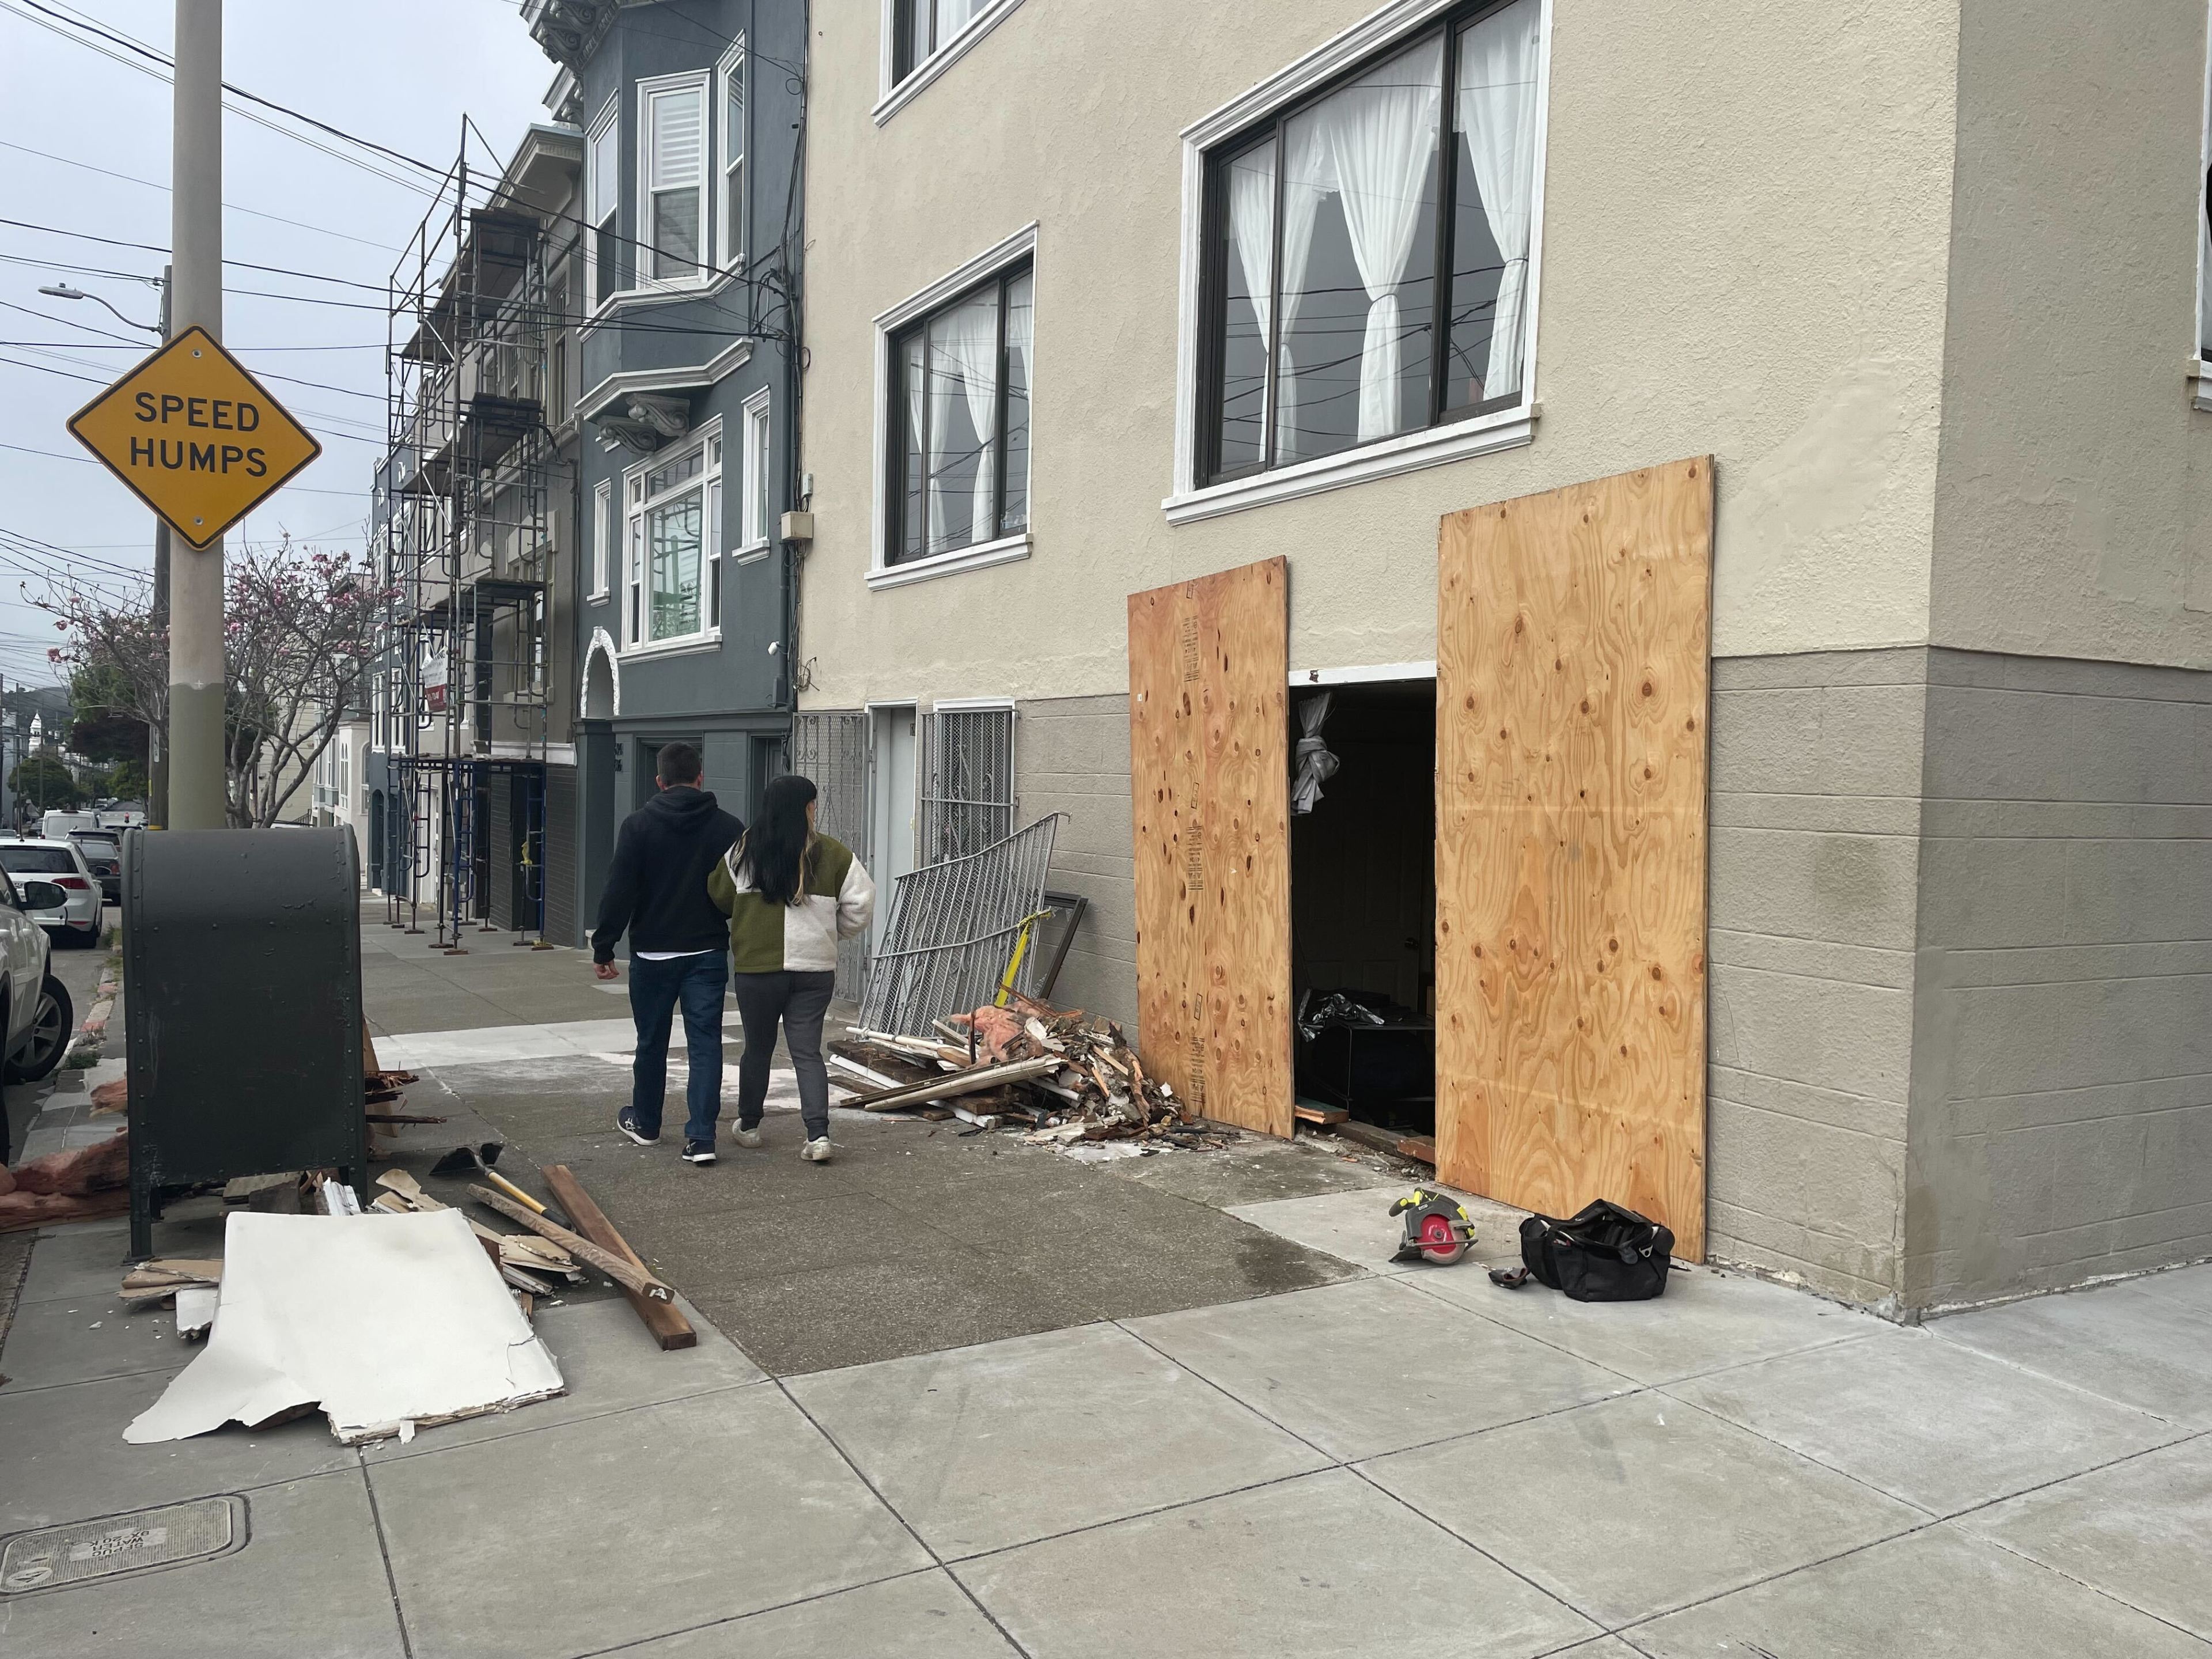 Wreckage from a crash at an apartment building at 698 Cabrillo St. is seen Tuesday after two men crashed a car into it hours earlier. The men were fleeing in the vehicle after robbing a woman at 26th Avenue and Balboa Street around 10:30 a.m. Tuesday, police said.